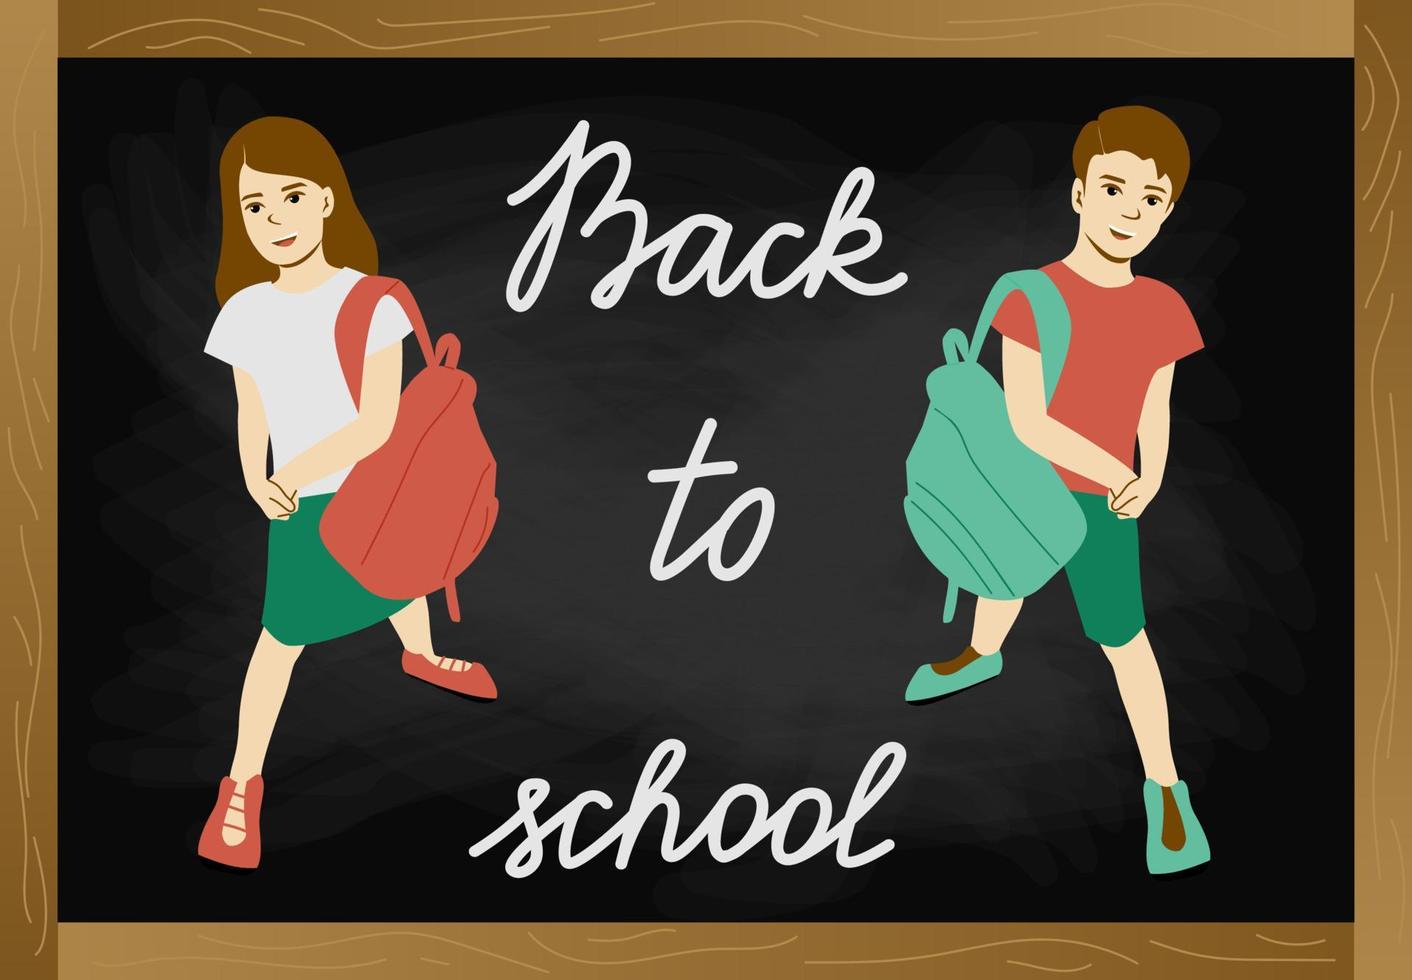 Back to school chalkboard with text, two schoolchildren girl and boy with schoolbags on blackboard background vector illustration.